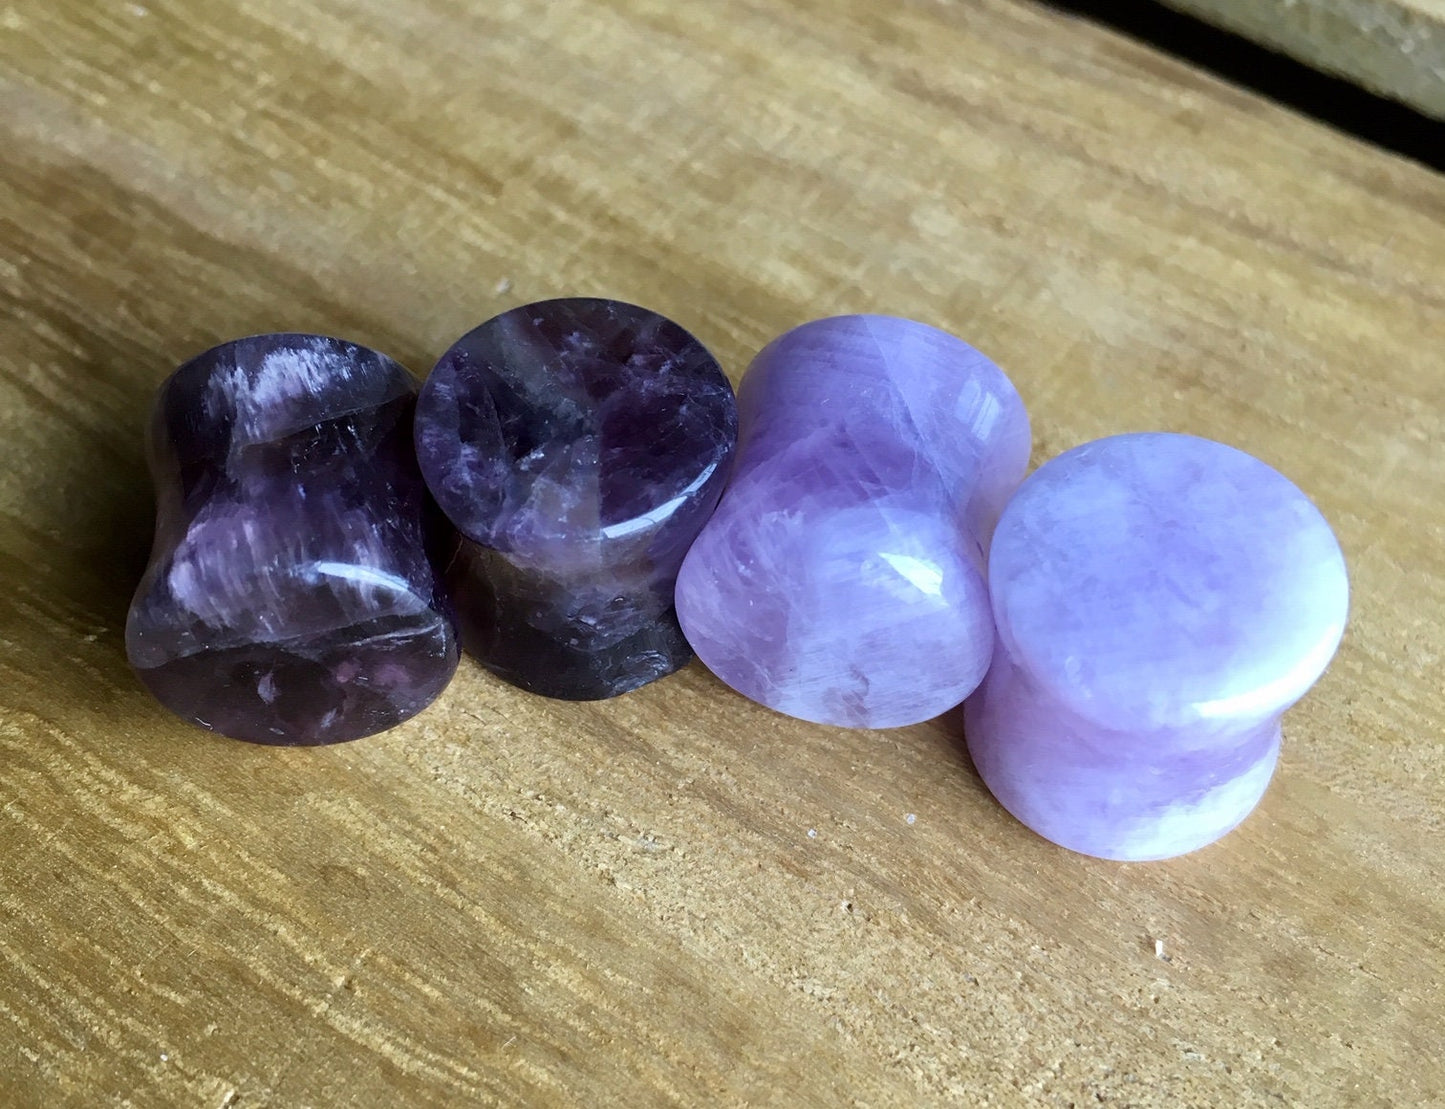 PAIR of Stunning Amethyst Organic Stone Plugs - Gauges 8g (3mm) up to 1" (25mm) available!